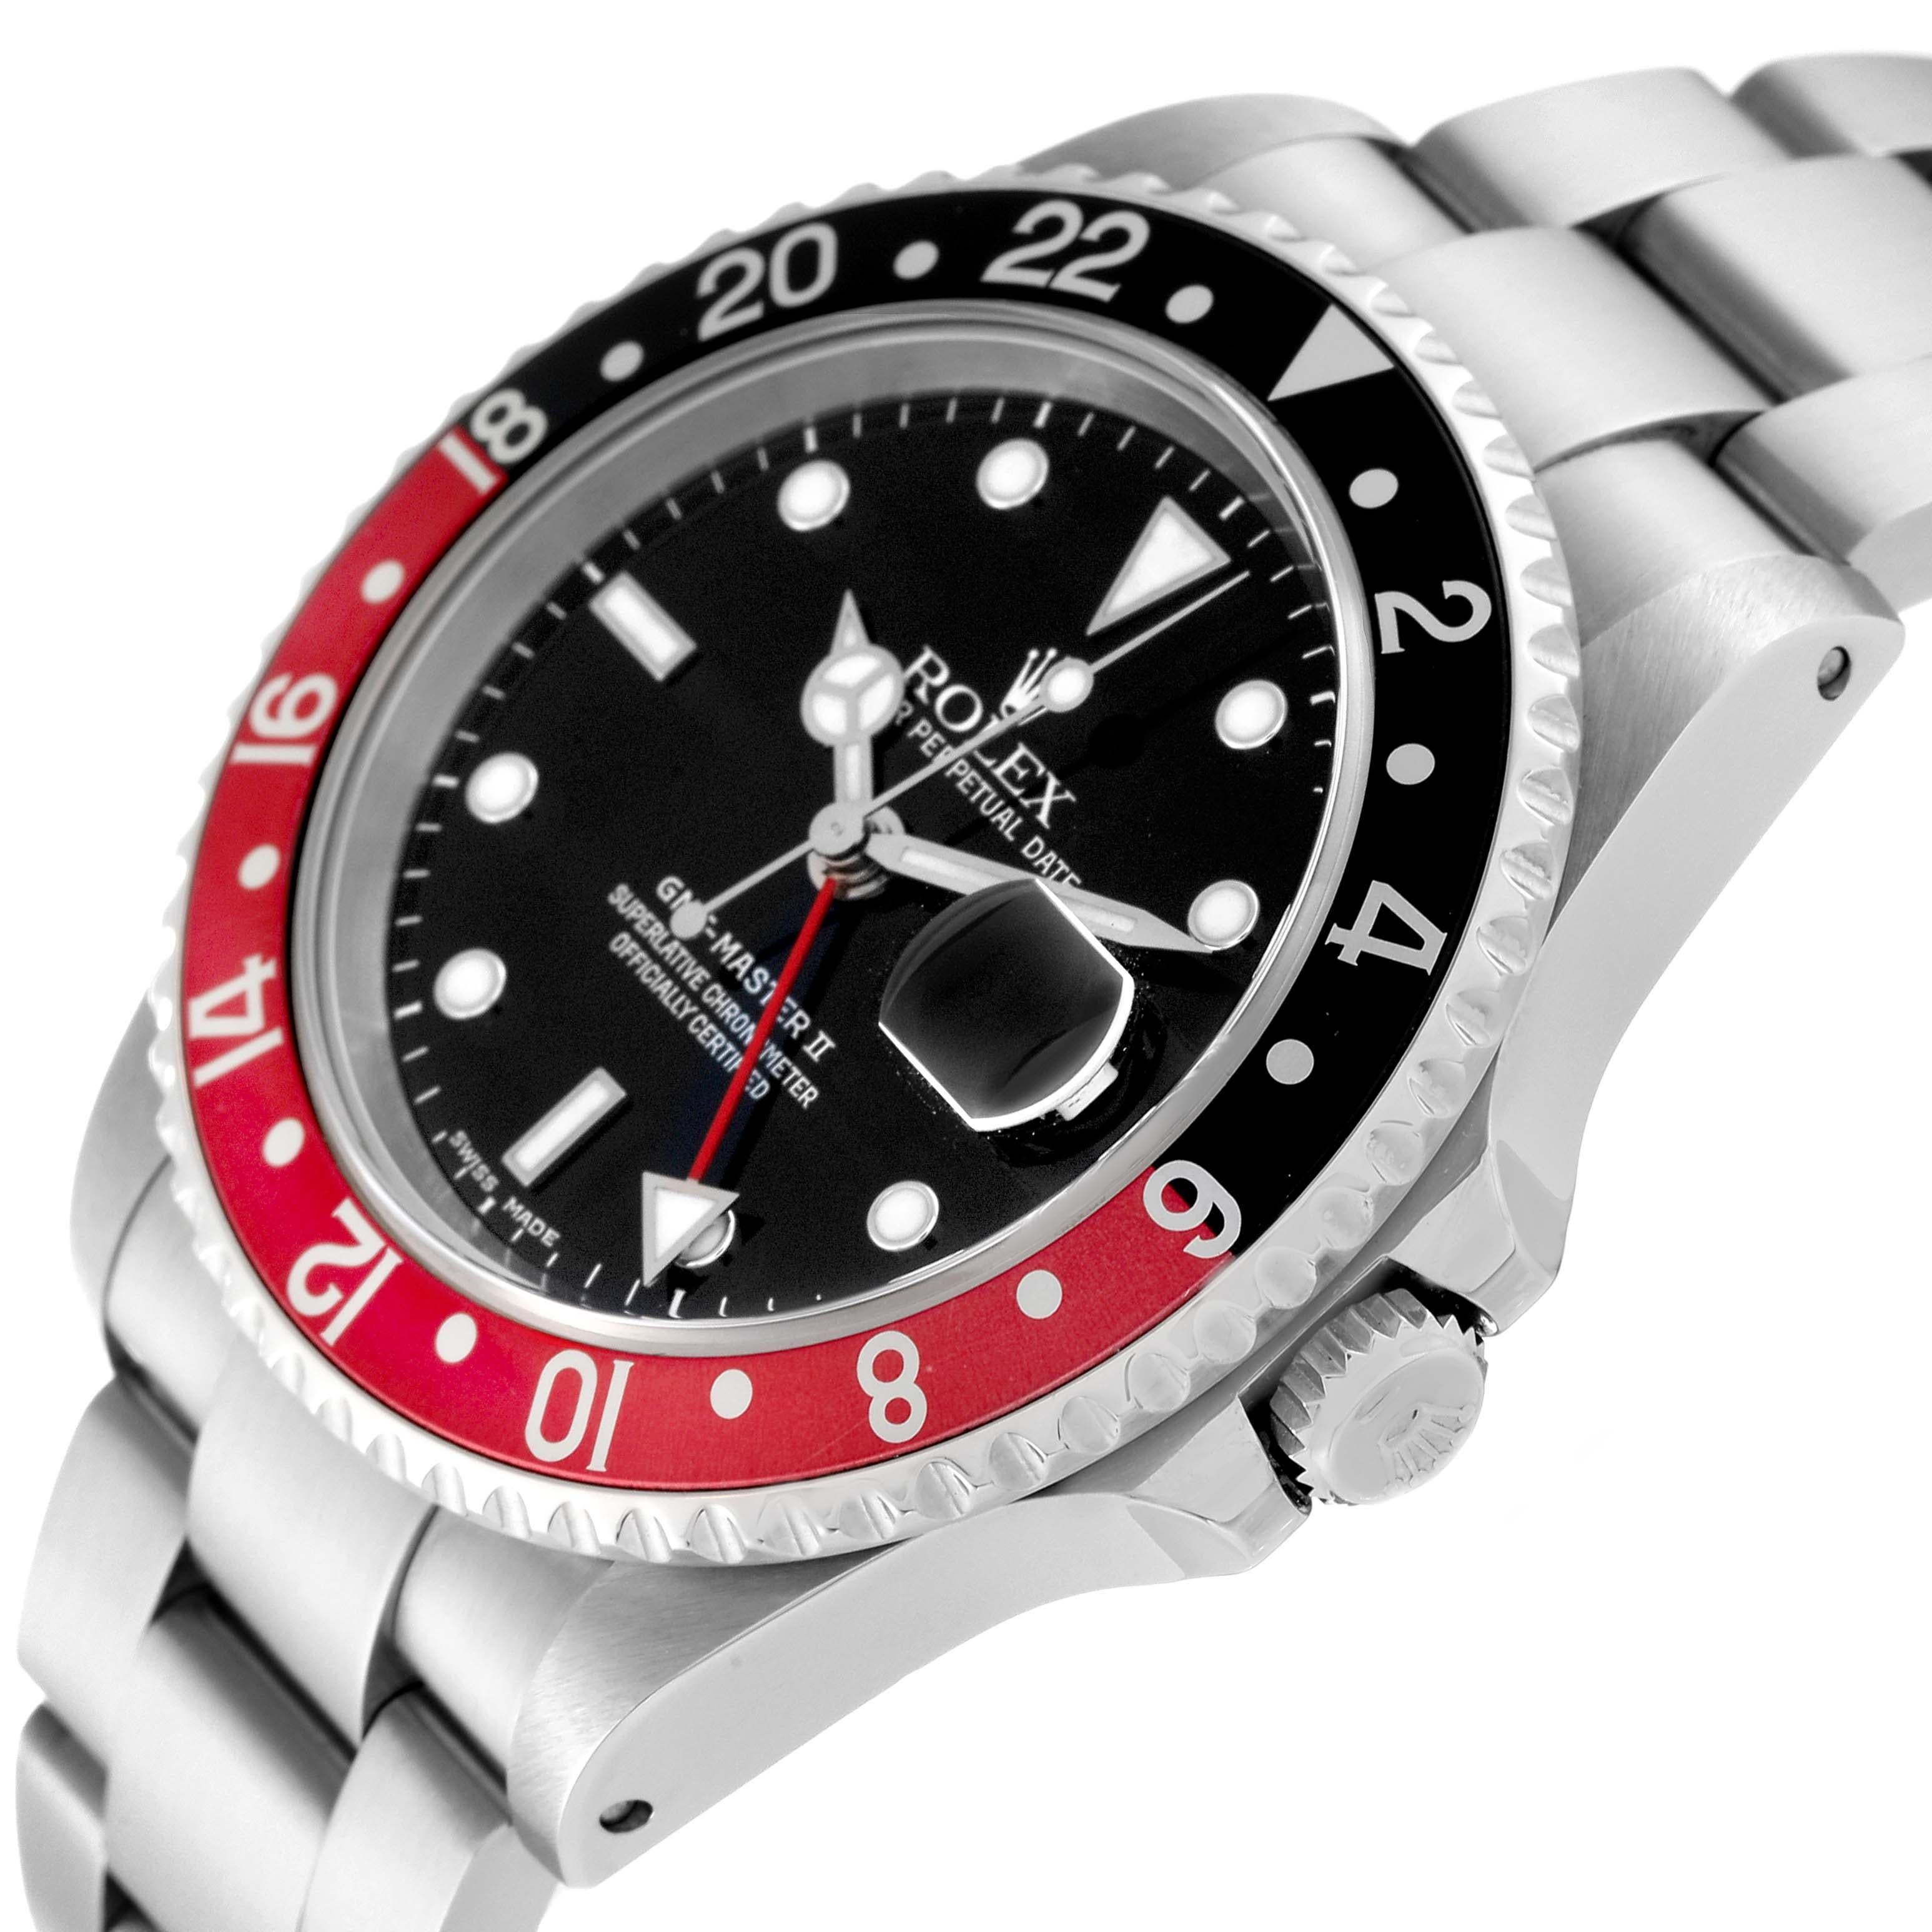  Rolex GMT Master II Black Red Coke Bezel Steel Mens Watch 16710 Box Papers Pour hommes 